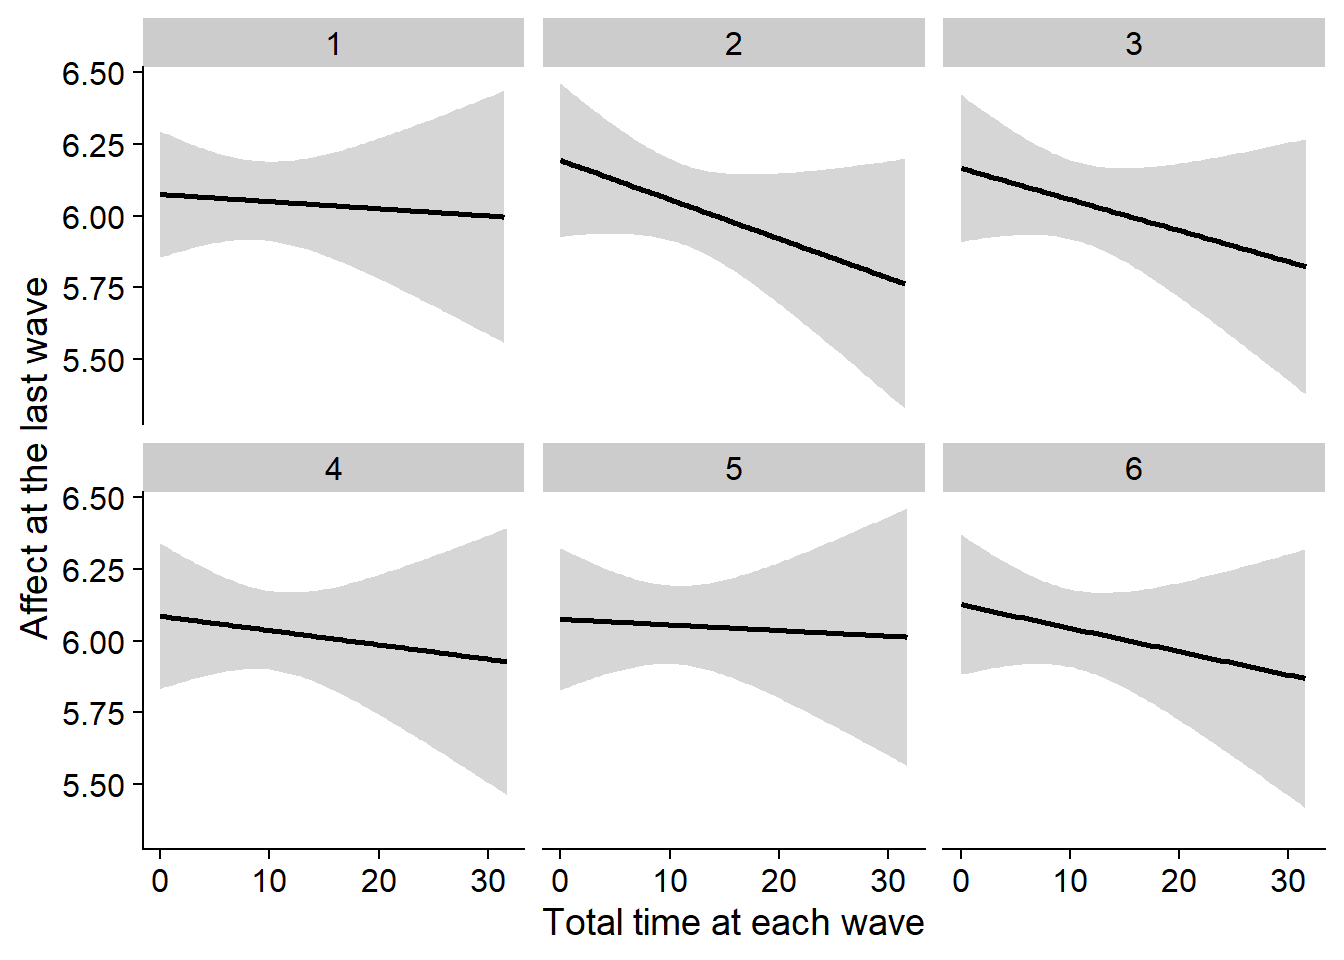 Correlation between affect at the last wave and total time at each wave